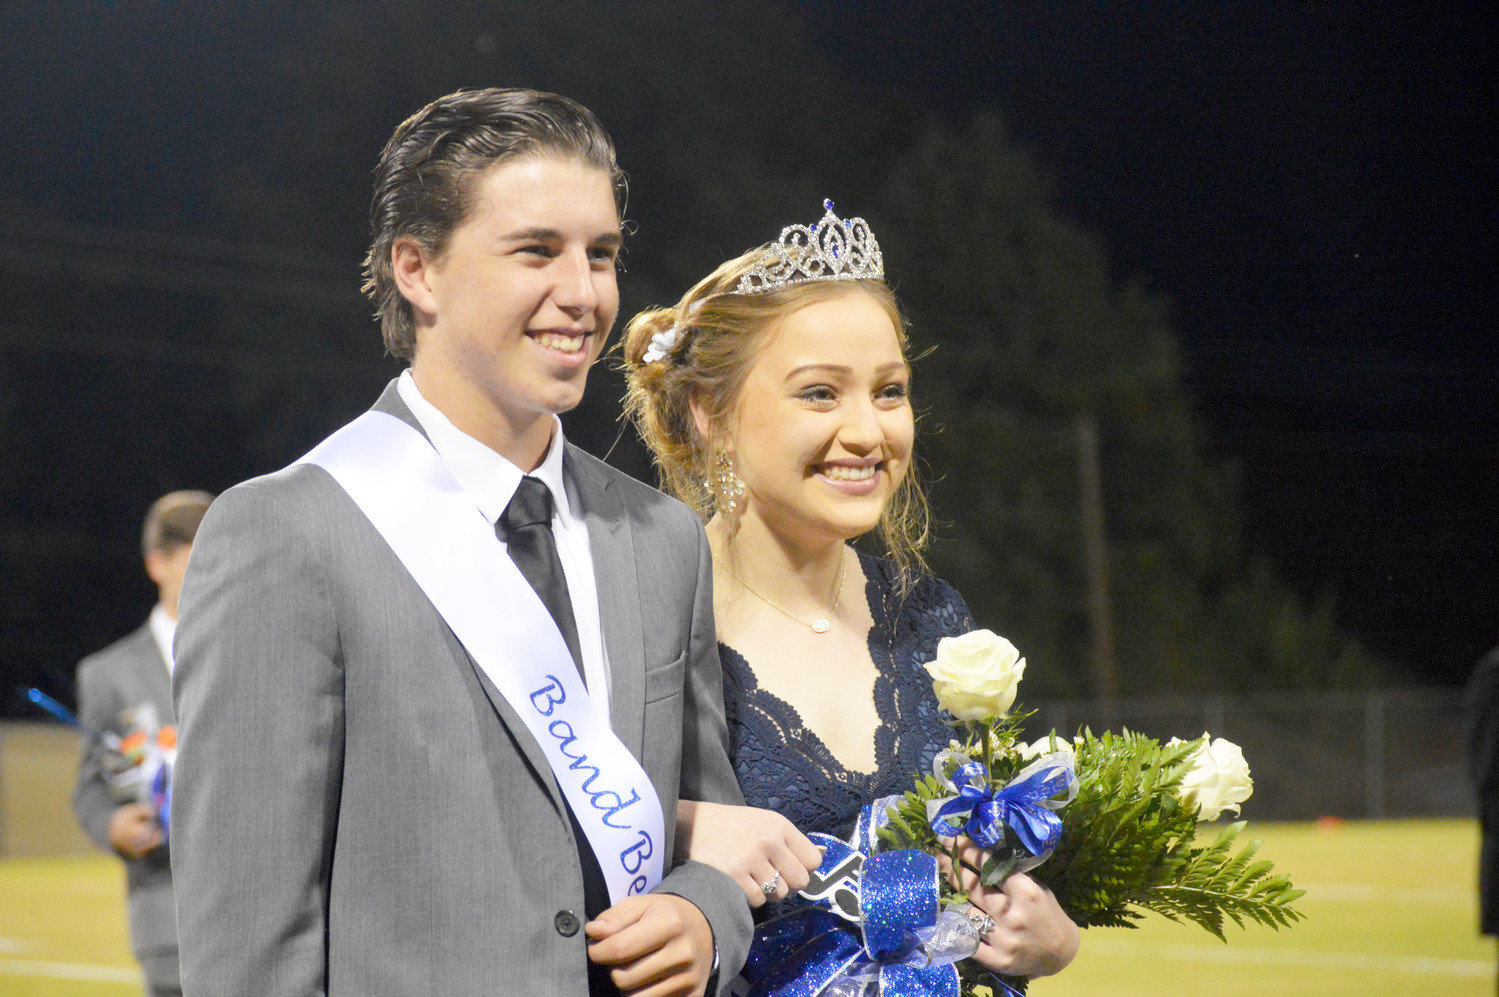 Quitman senior band members Jacob Day and Lilly Danner were selected Proud Blue Band Beau and Sweetheart prior to Friday’s game in Quitman.  (Monitor photo by Larry Tucker)